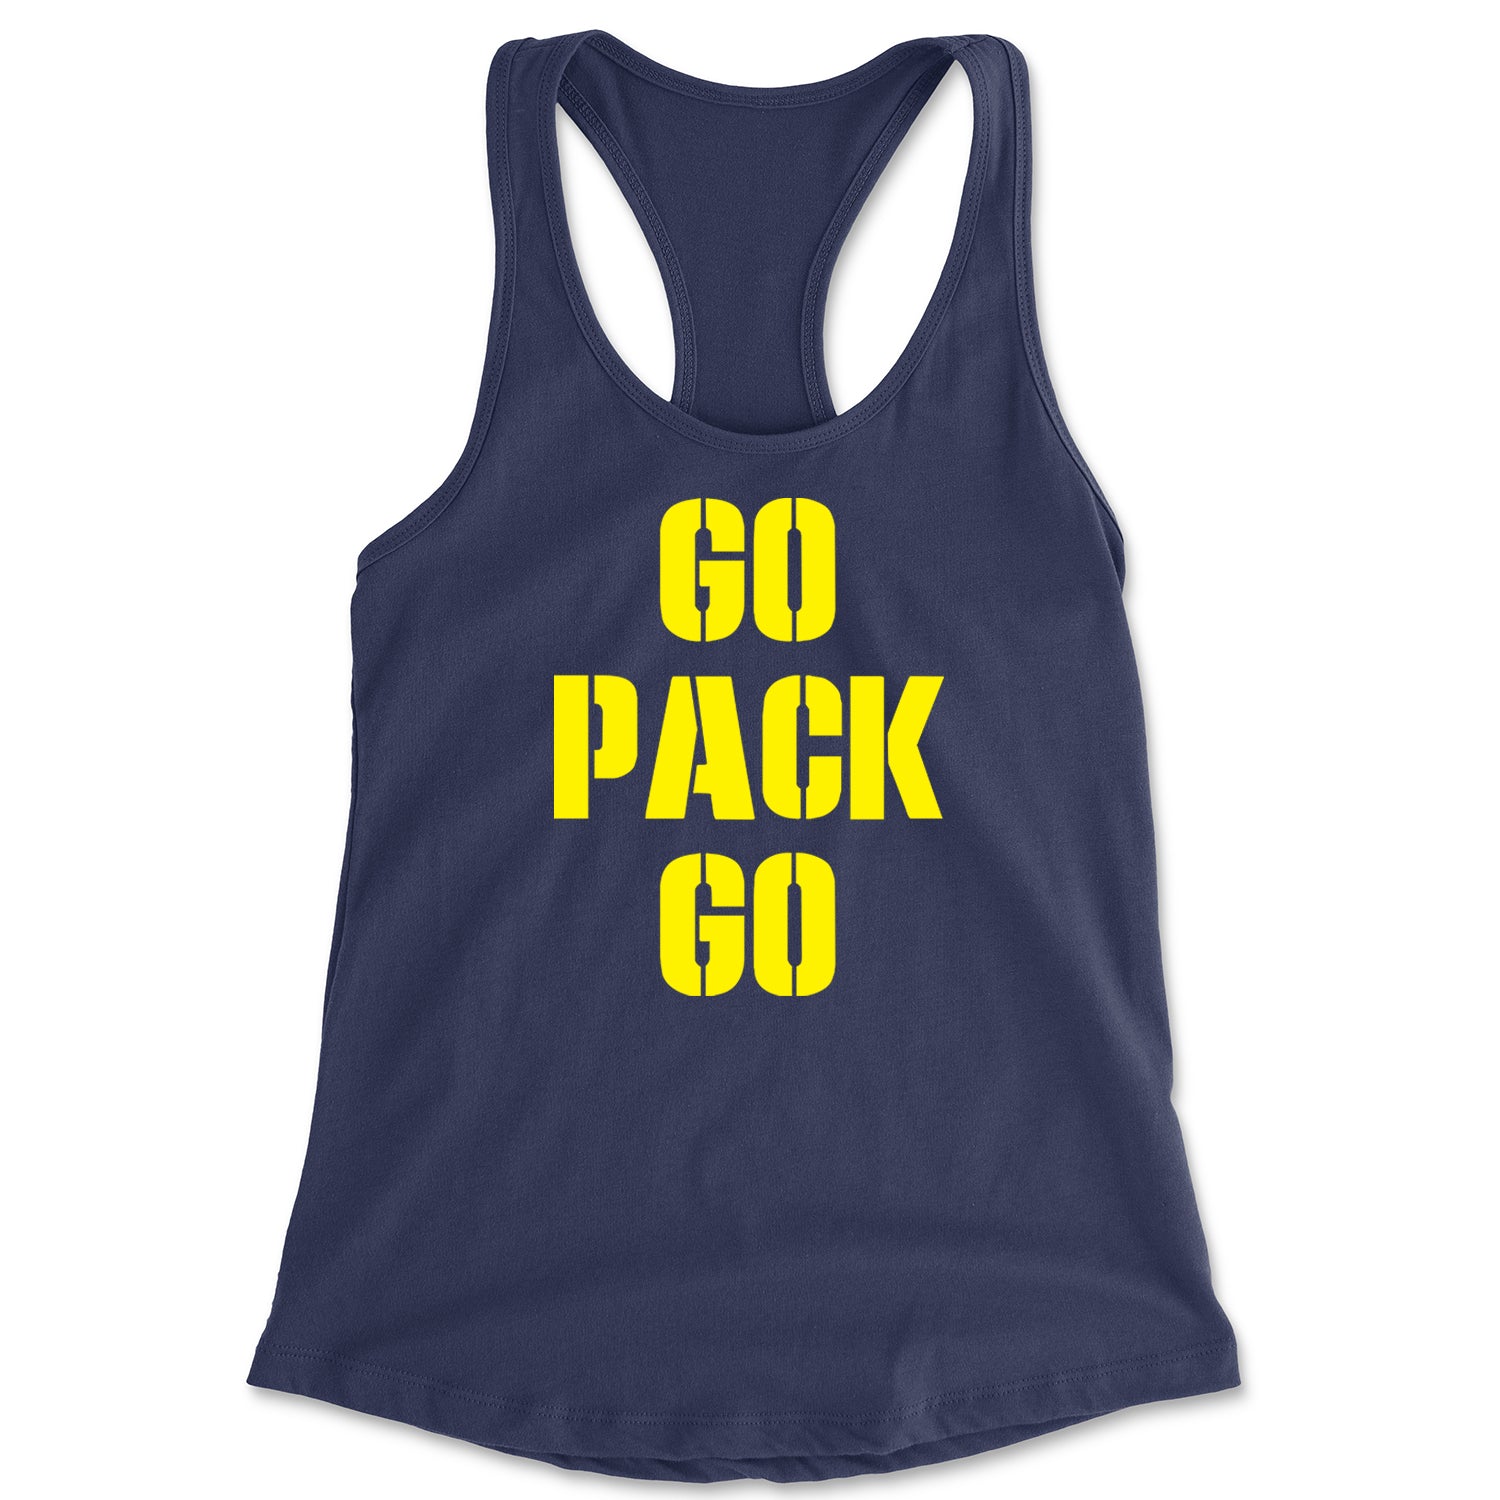 Go Pack Go Green Bay Racerback Tank Top for Women football, greenbay, packer by Expression Tees